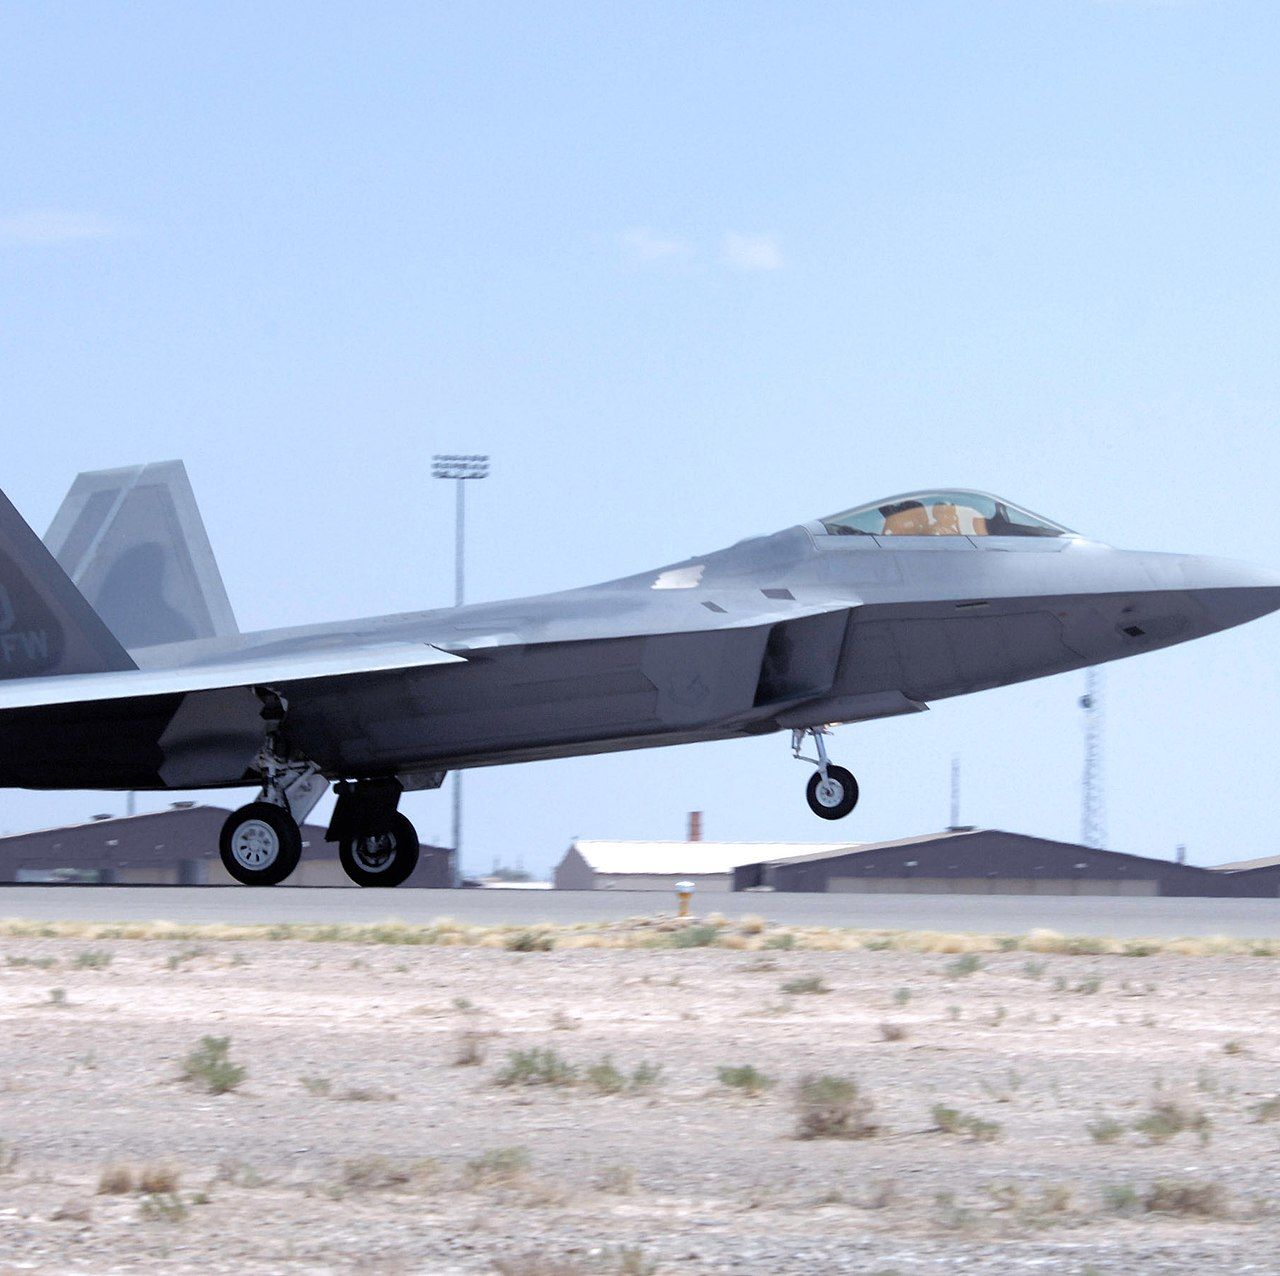 An F-22 Face-Planted on the Runway